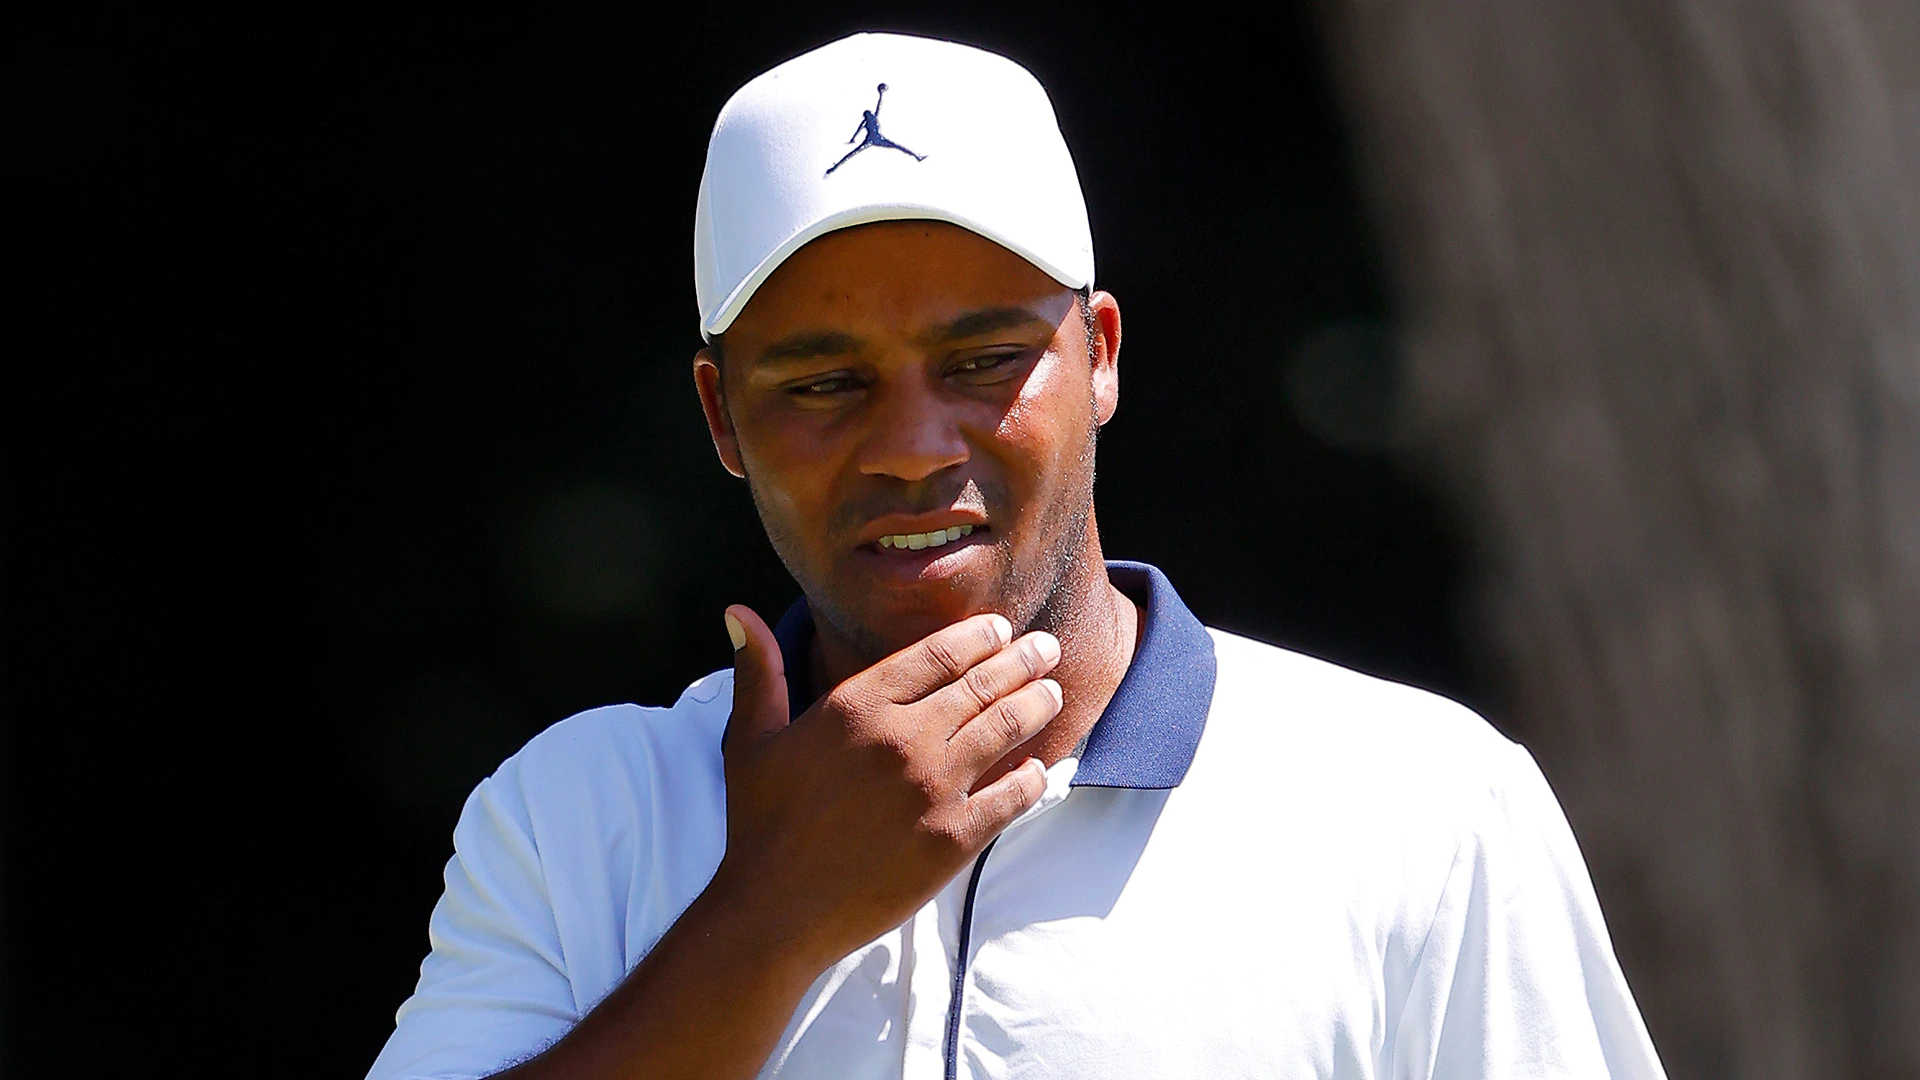 Harold Varner III ‘doesn’t get rattled’ after opening triple, rallies for 66 and Colonial lead